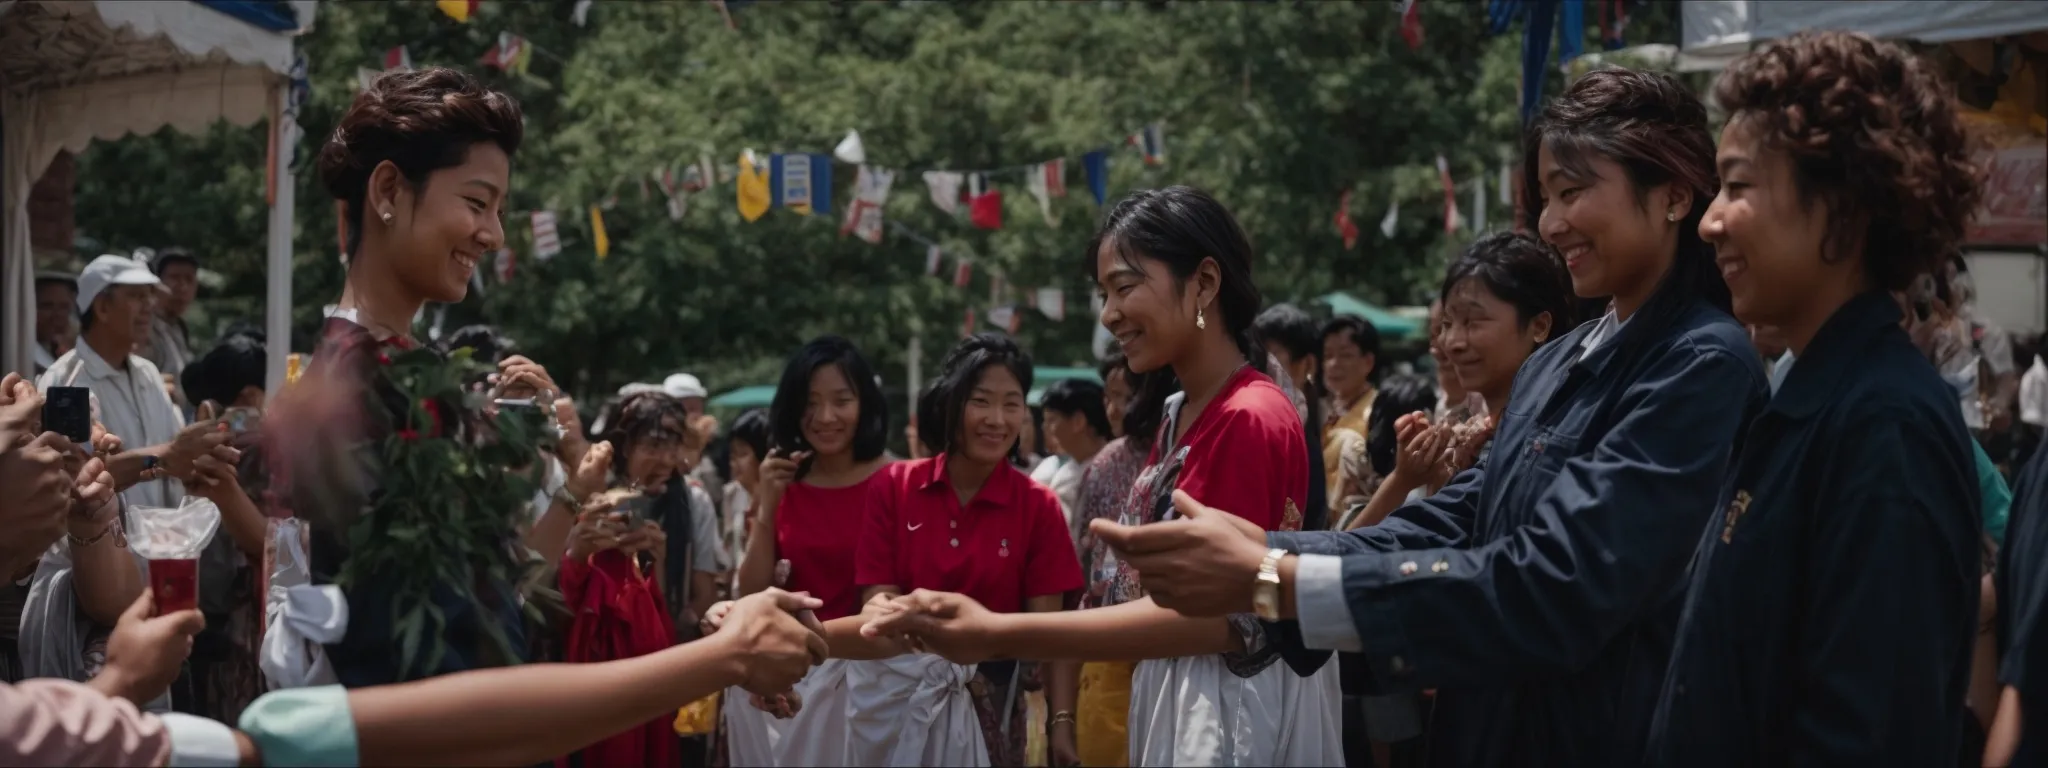 a group of shop owners shaking hands at a local community event.